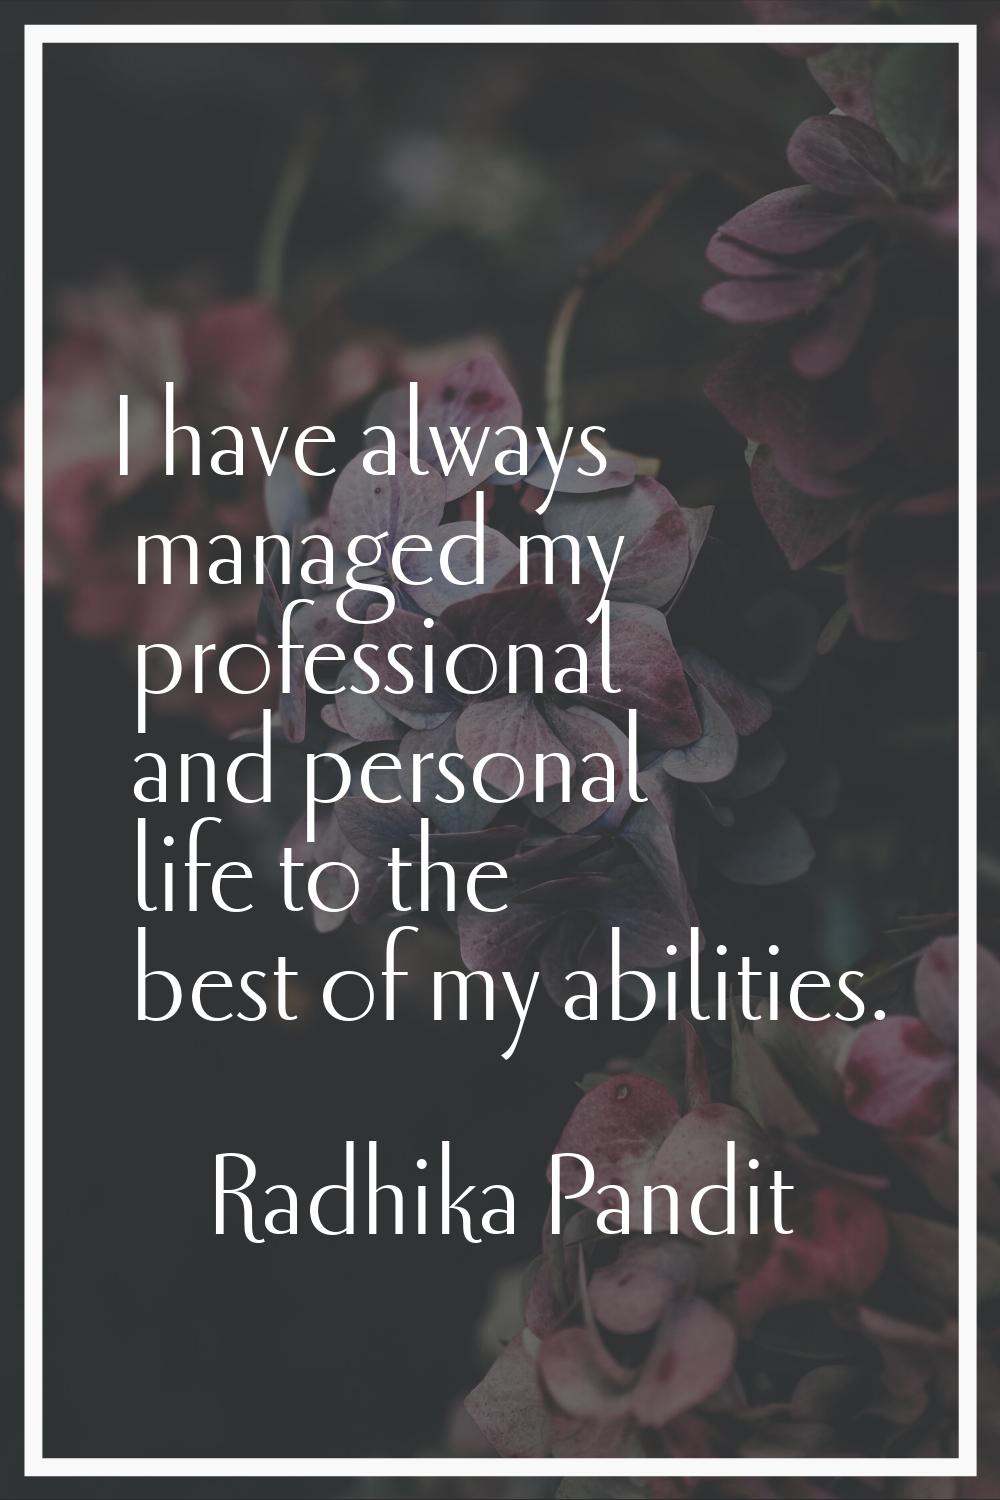 I have always managed my professional and personal life to the best of my abilities.